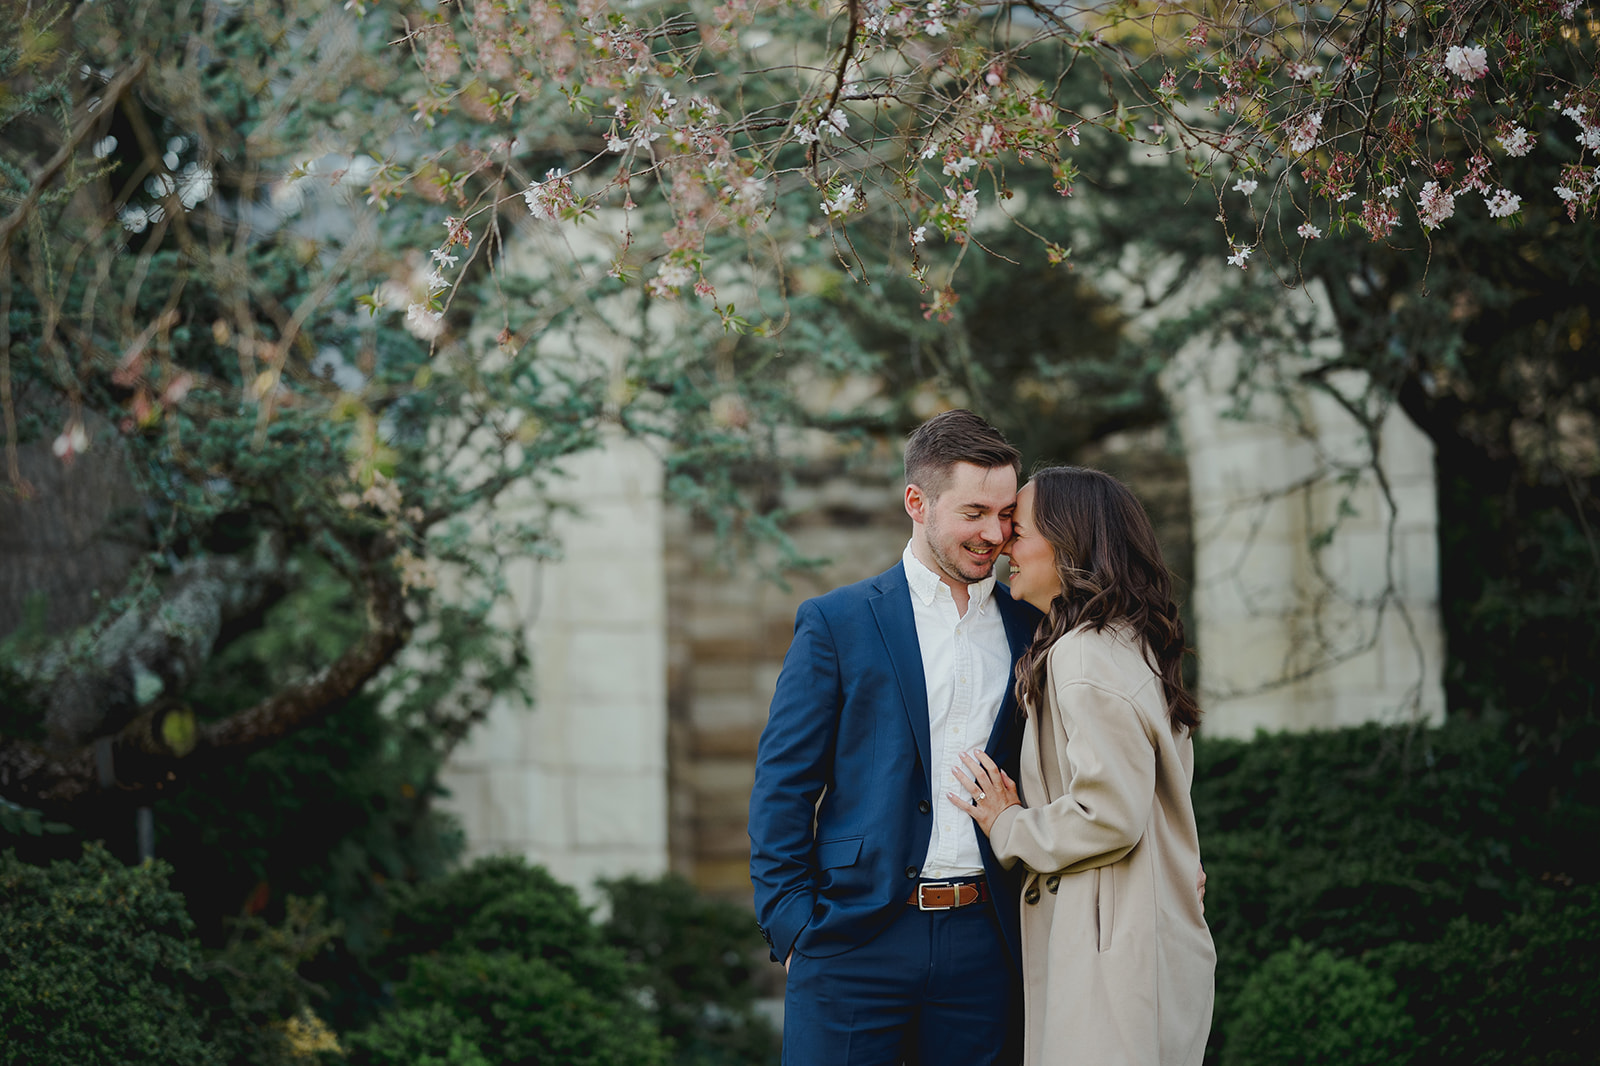 Engagement session shot showing couple's shared happiness at Bishop's Garden, Washington D.C.